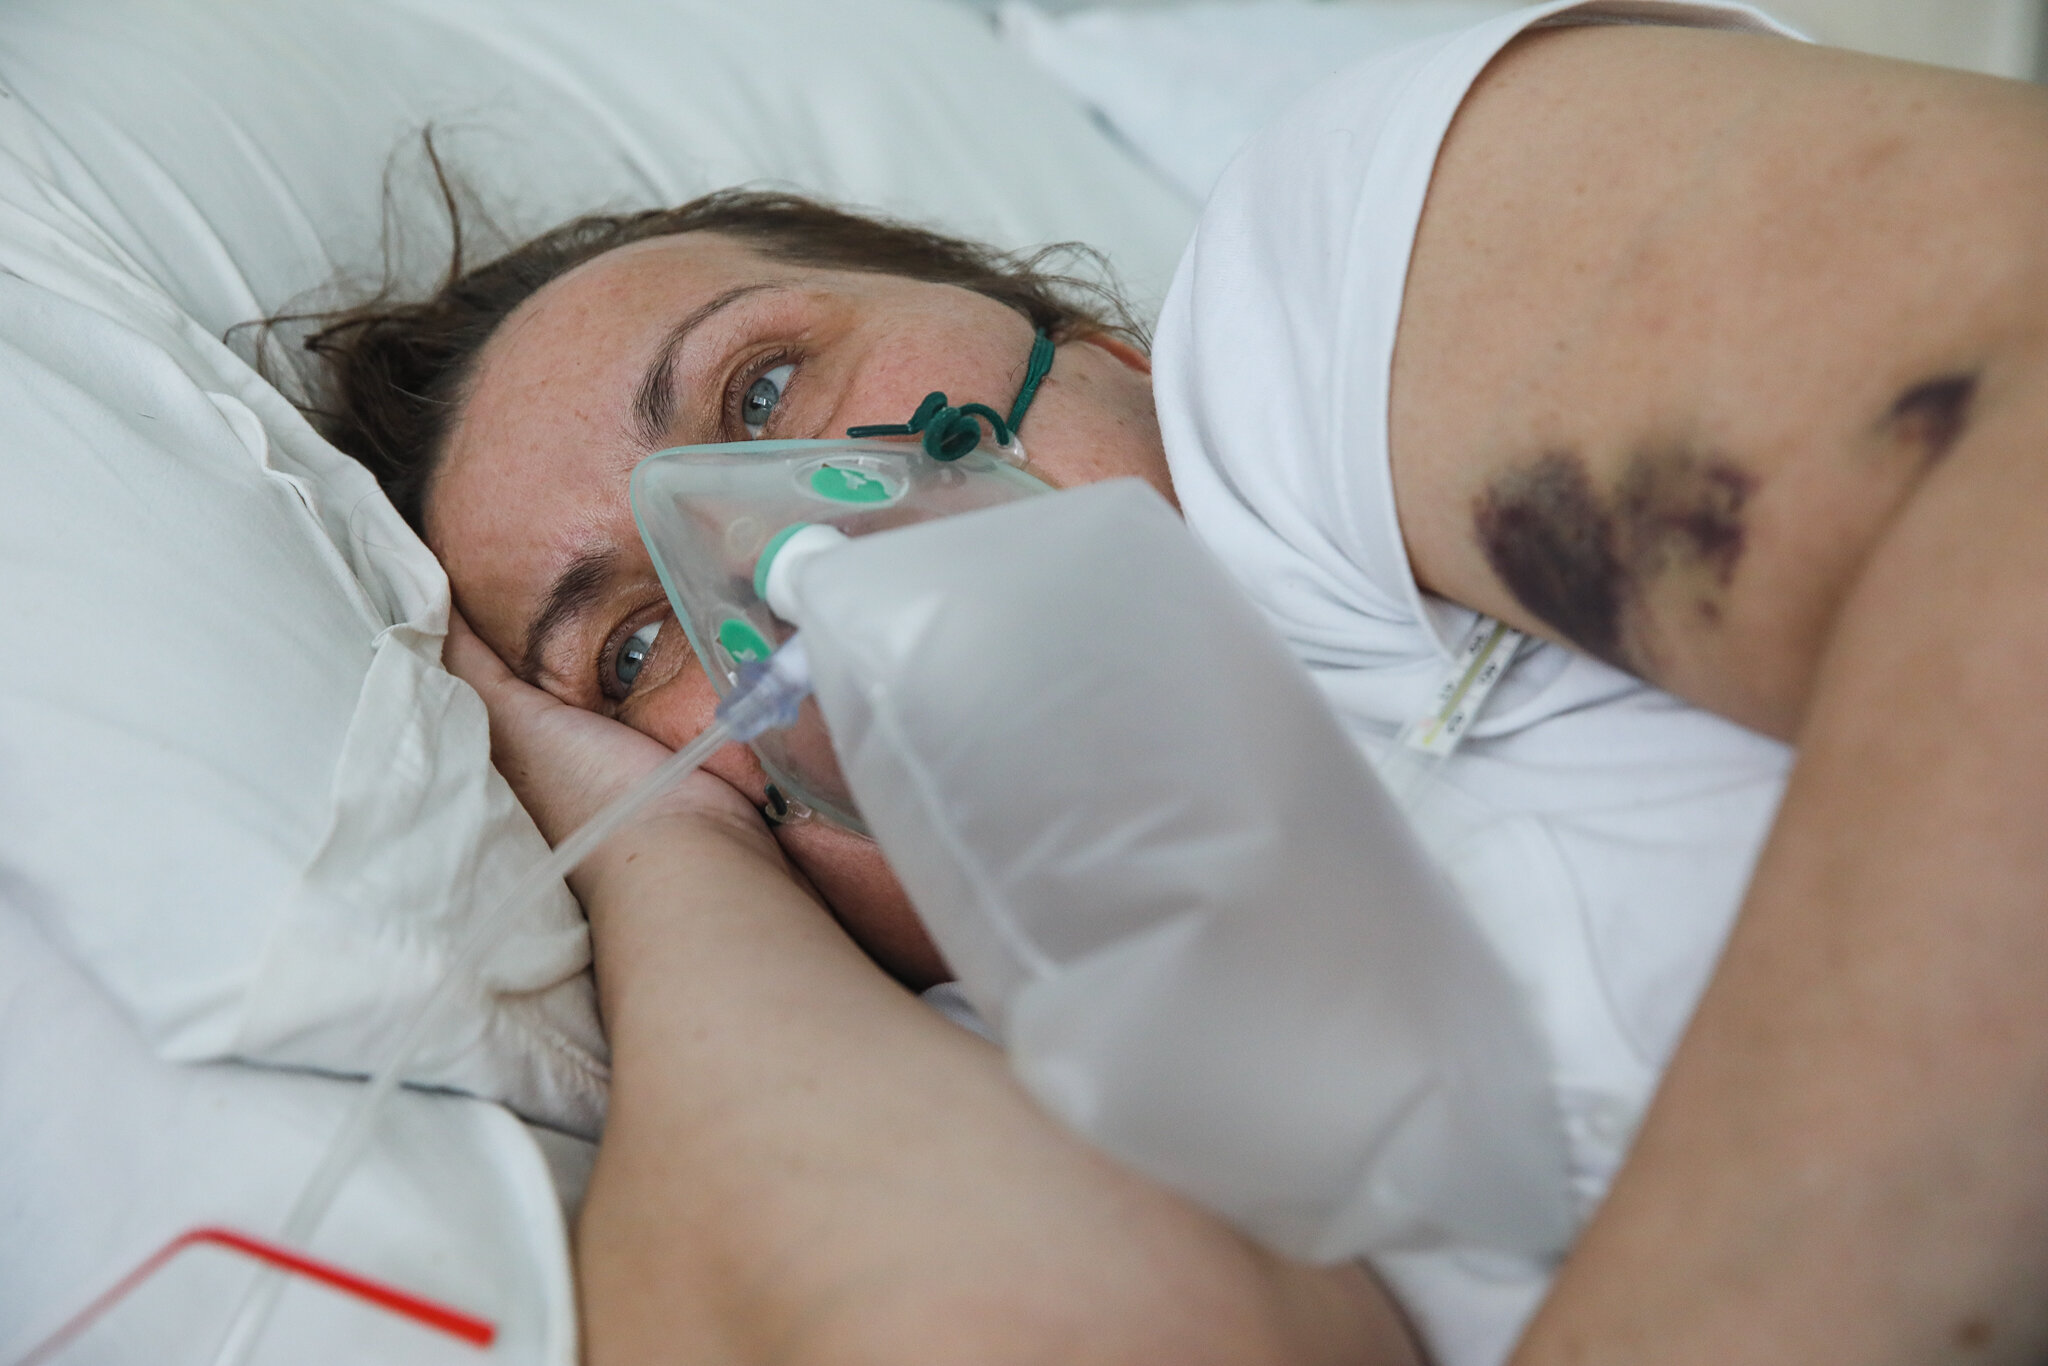 A patient wears an oxygen mask at Kolomyia District Hospital in Ivano-Frankivsk Oblast on March 16, 2021.